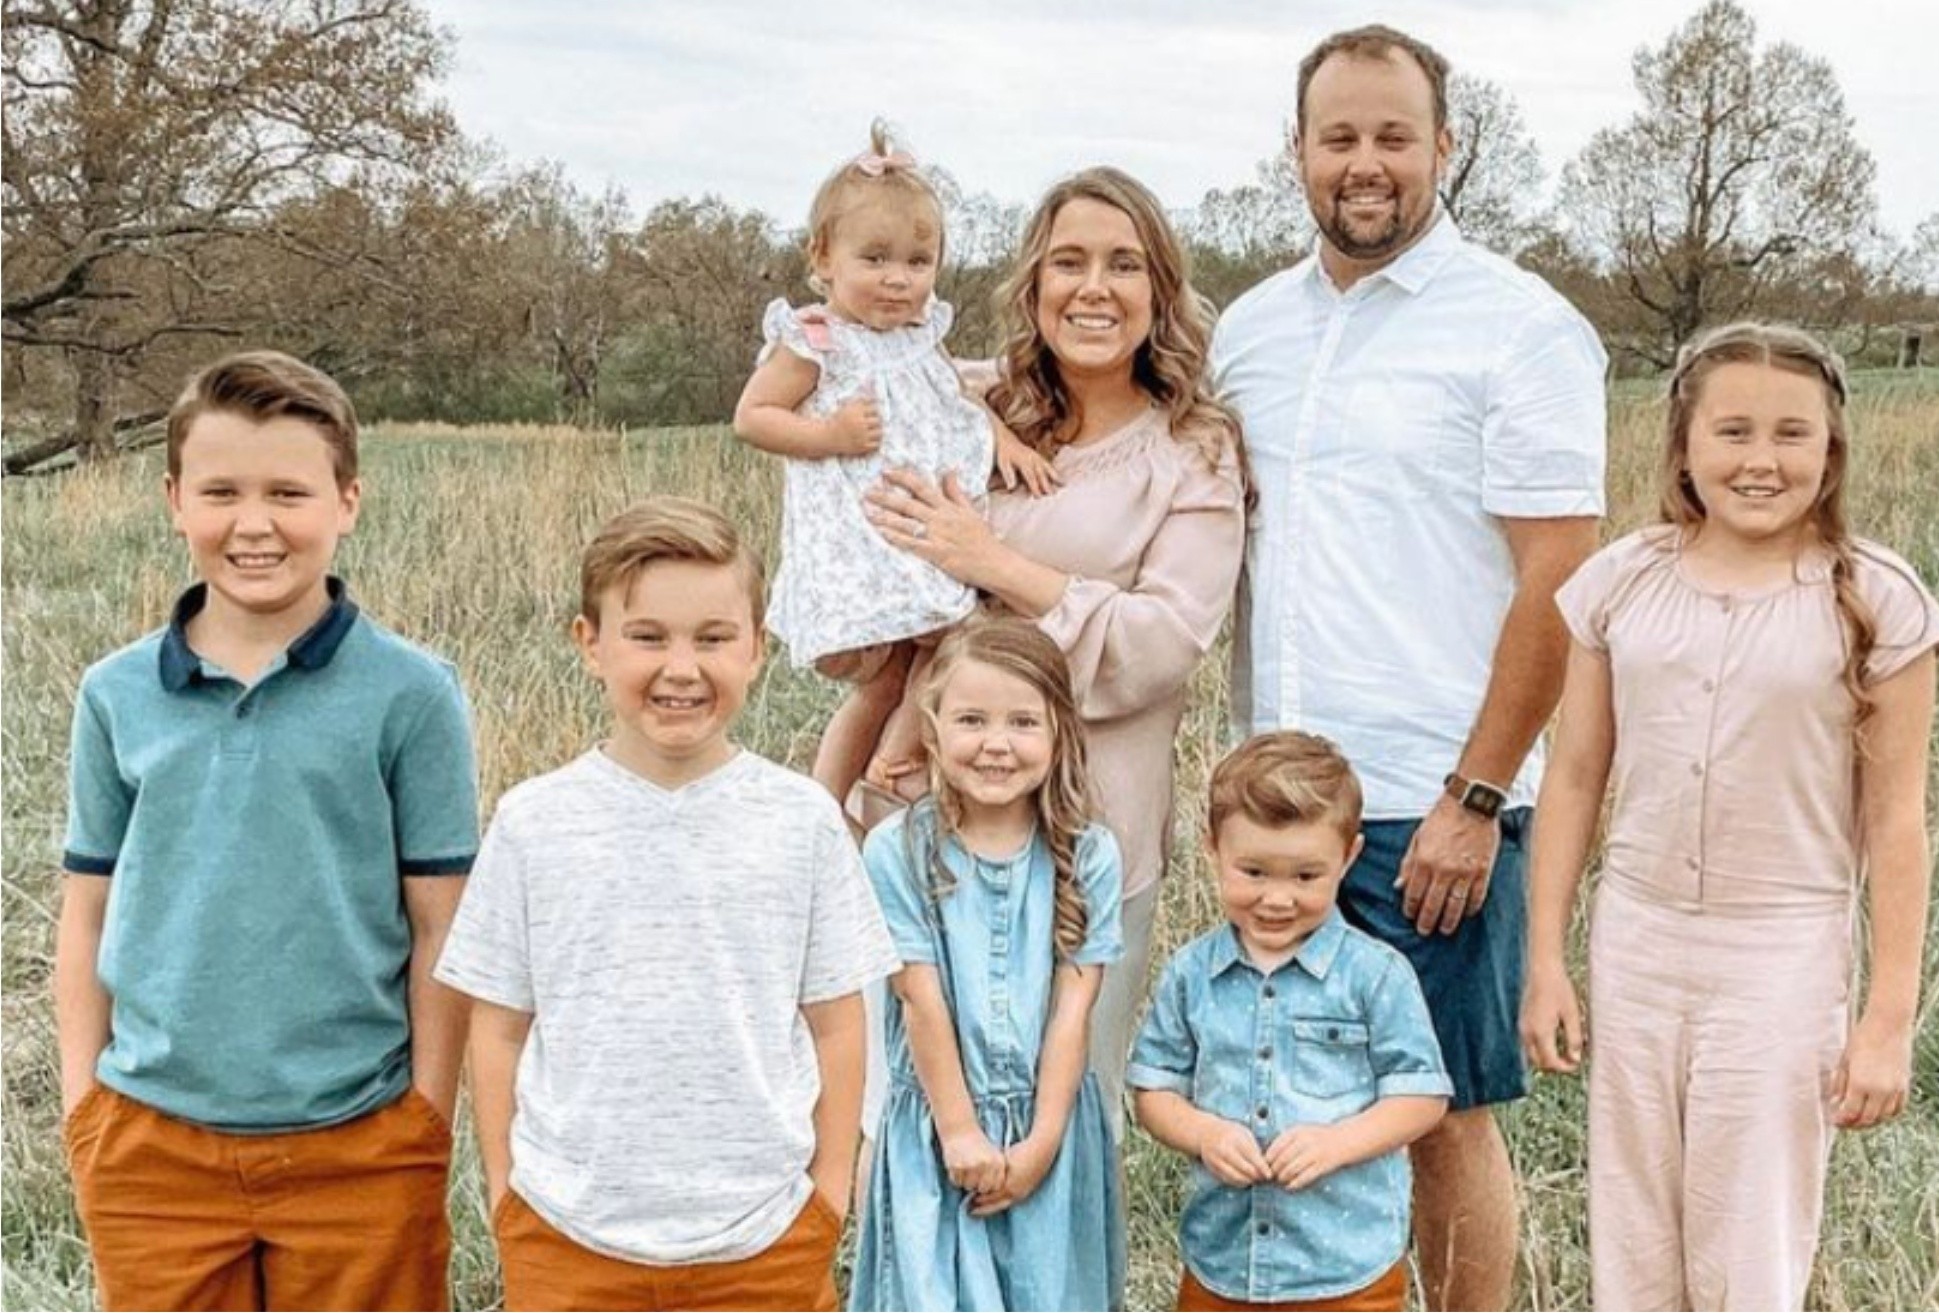 Josh Duggar And Anna Duggar Celebrate Anniversary! Here’s Where She Posted About It?